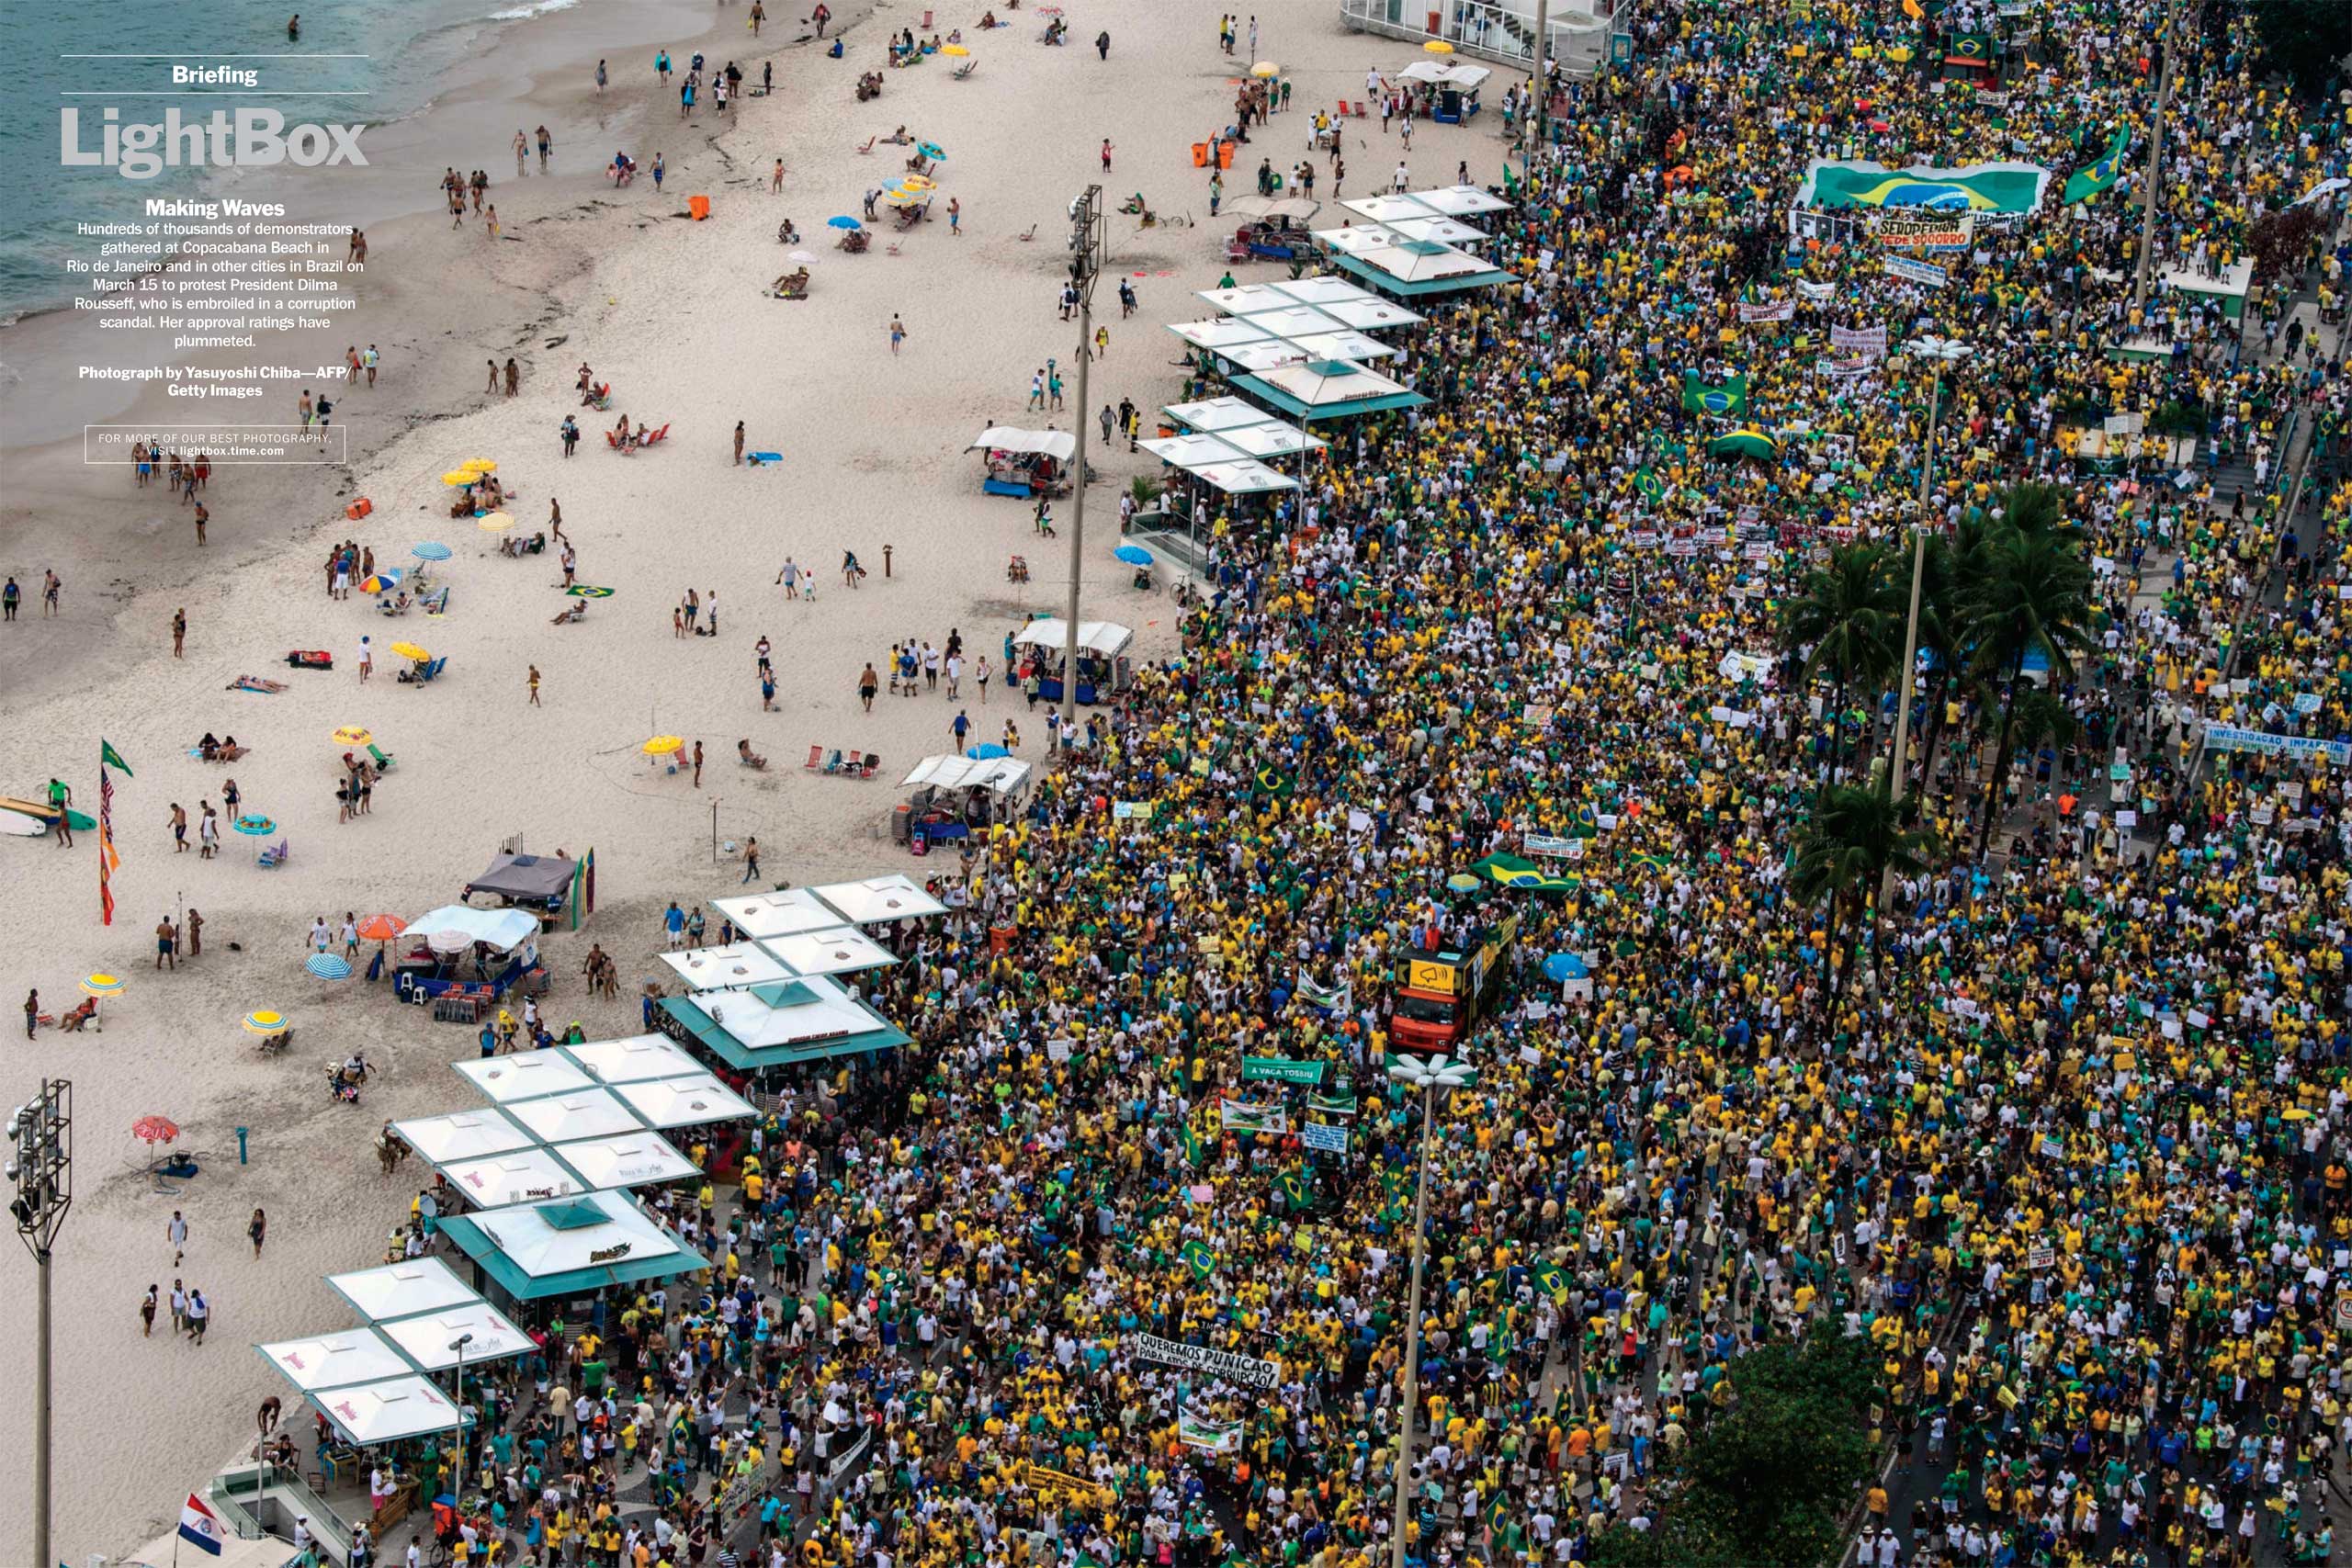 Photograph by Yasuyoshi Chiba—AFP/Getty ImagesHundreds of thousands of demonstrators gathered at Copacabana Beach in Rio de Janeiro and in other cities in Brazil on March 15 to protest President Dilma Rousseff, who is embroiled in a corruption scandal. Her approval ratings have plummeted. (TIME issue March 30, 2015)